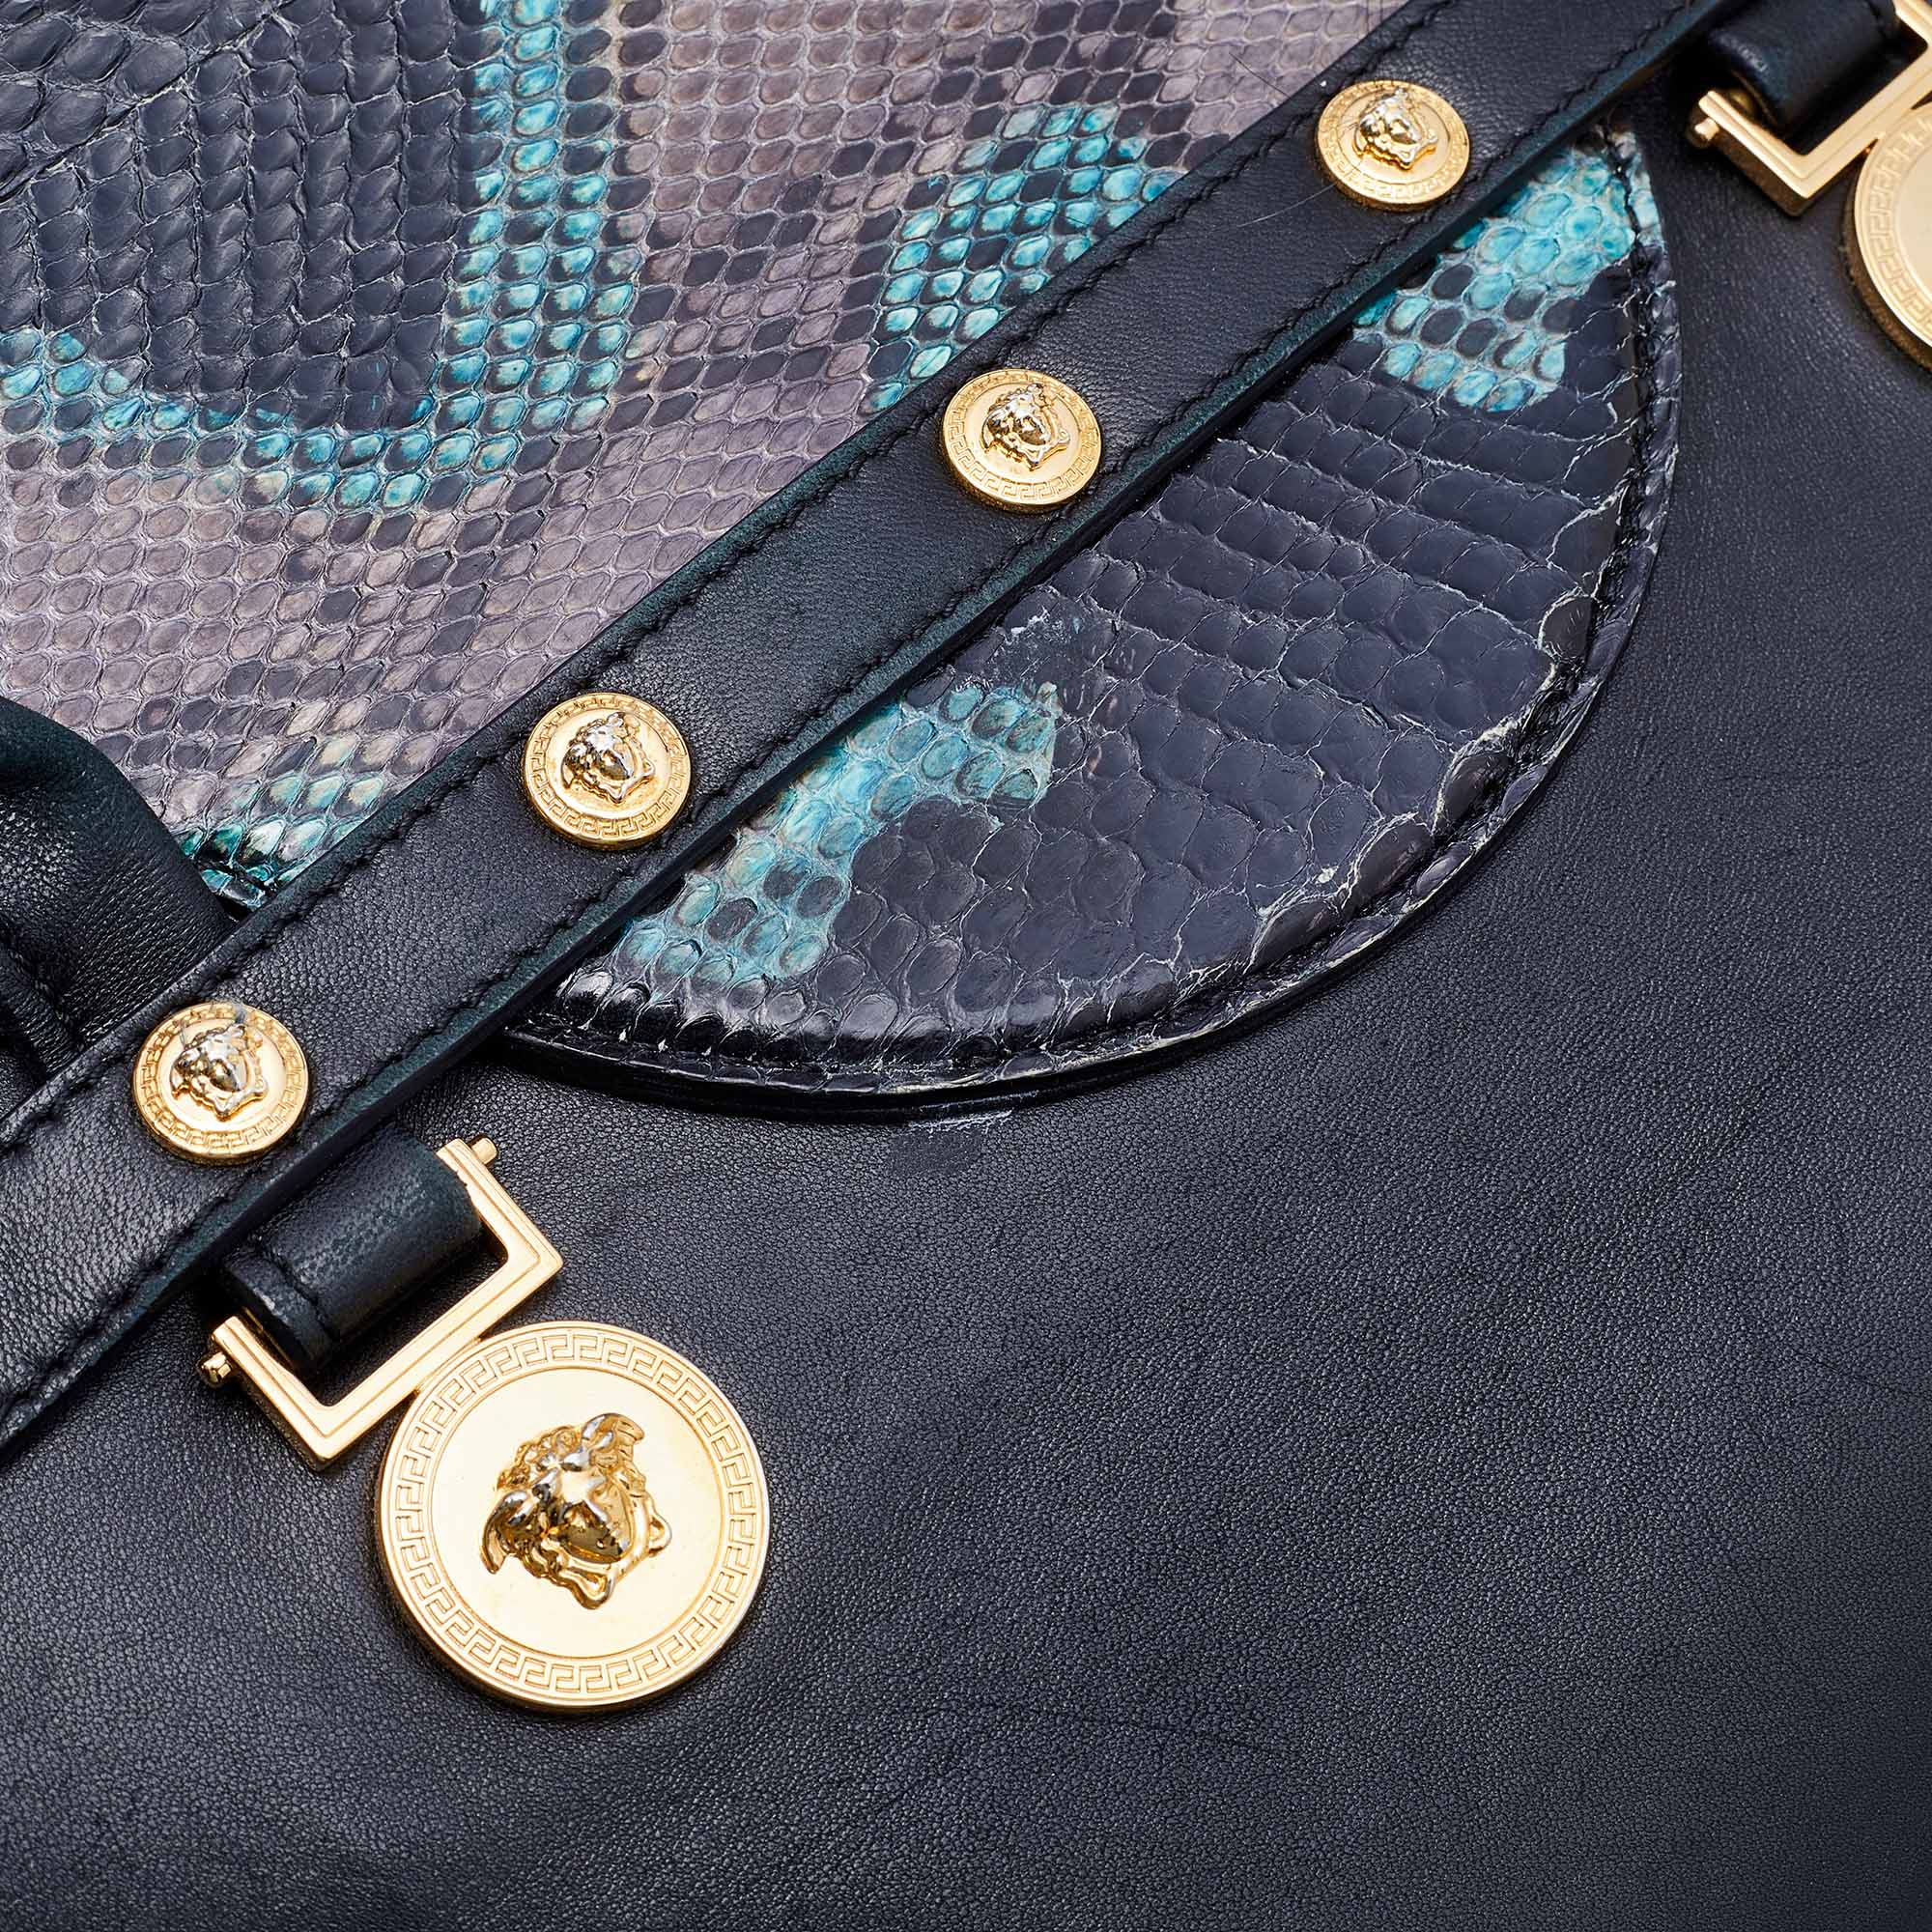 Versace Multcolor Leather And Python Medusa Medallion Tote